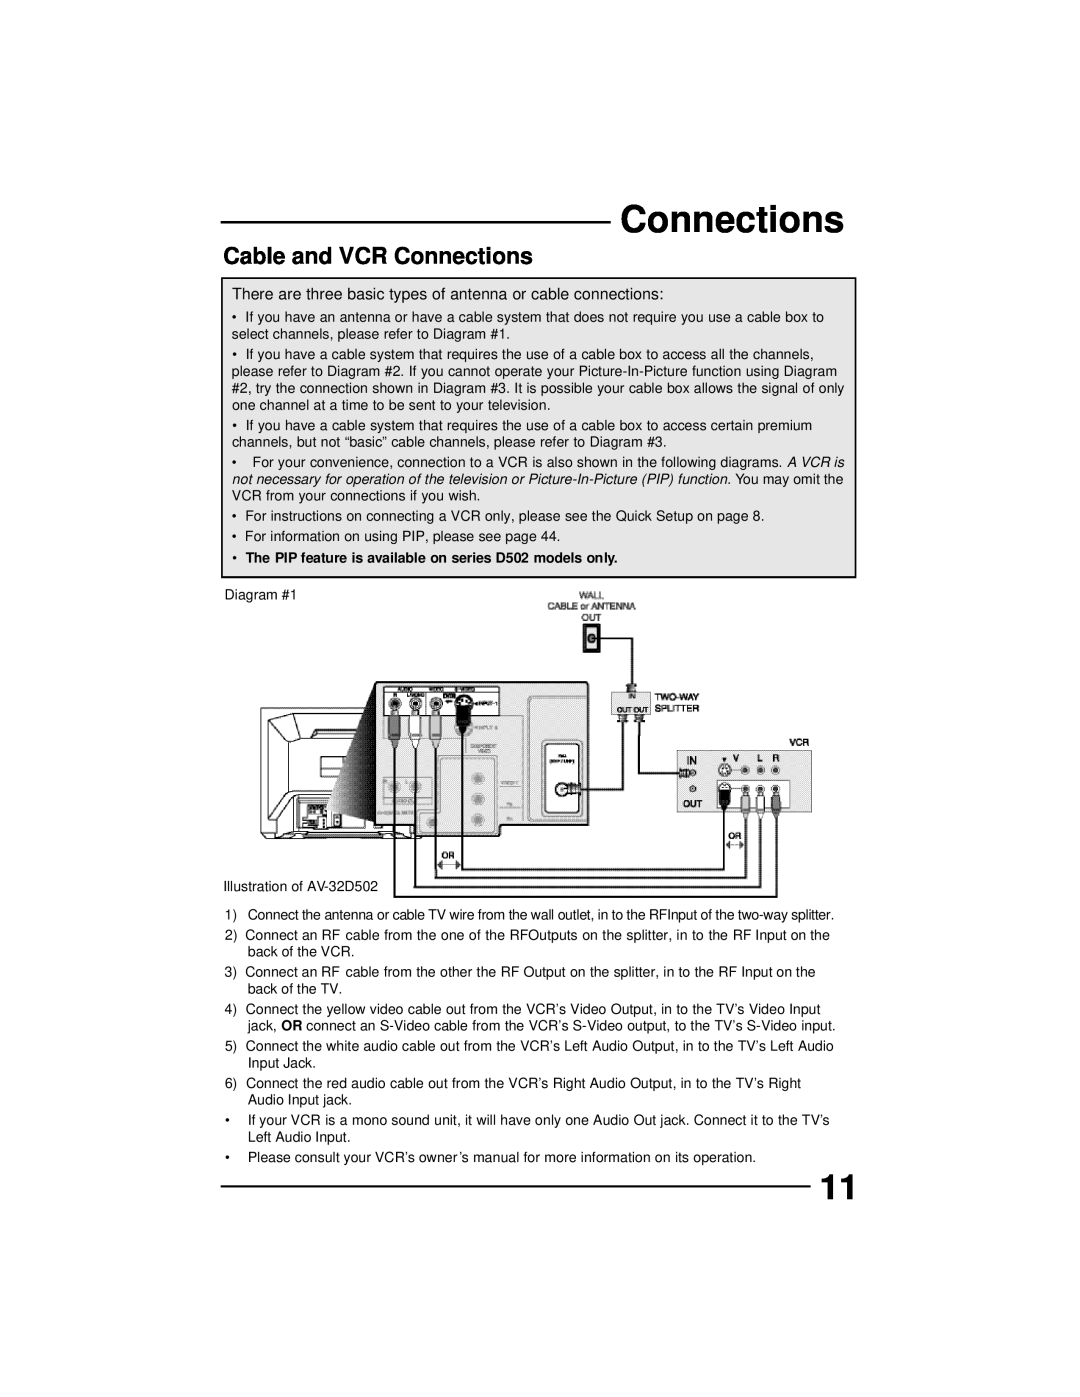 JVC AV 32D502, AV 36D202, AV 36D502 Cable and VCR Connections, The PIP feature is available on series D502 models only 